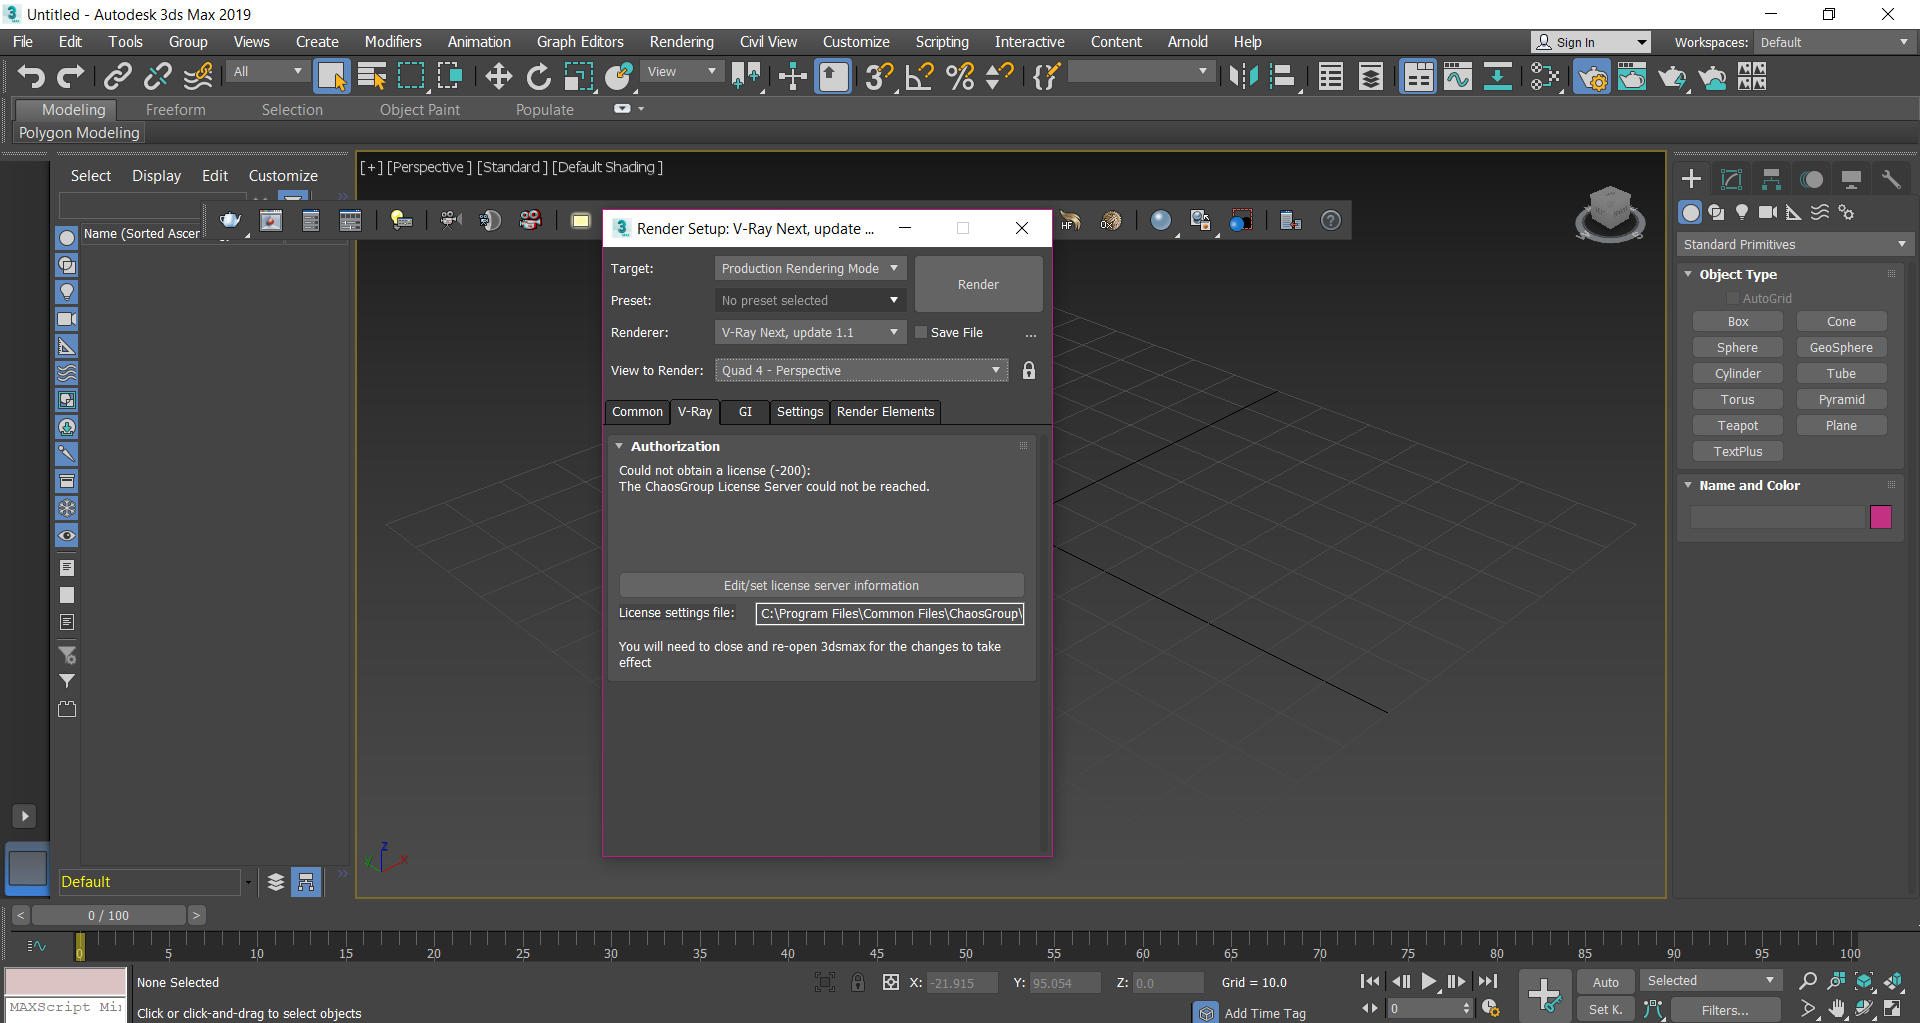 next Didn't work on 3Ds MAX 2019 - Autodesk - 3ds Max